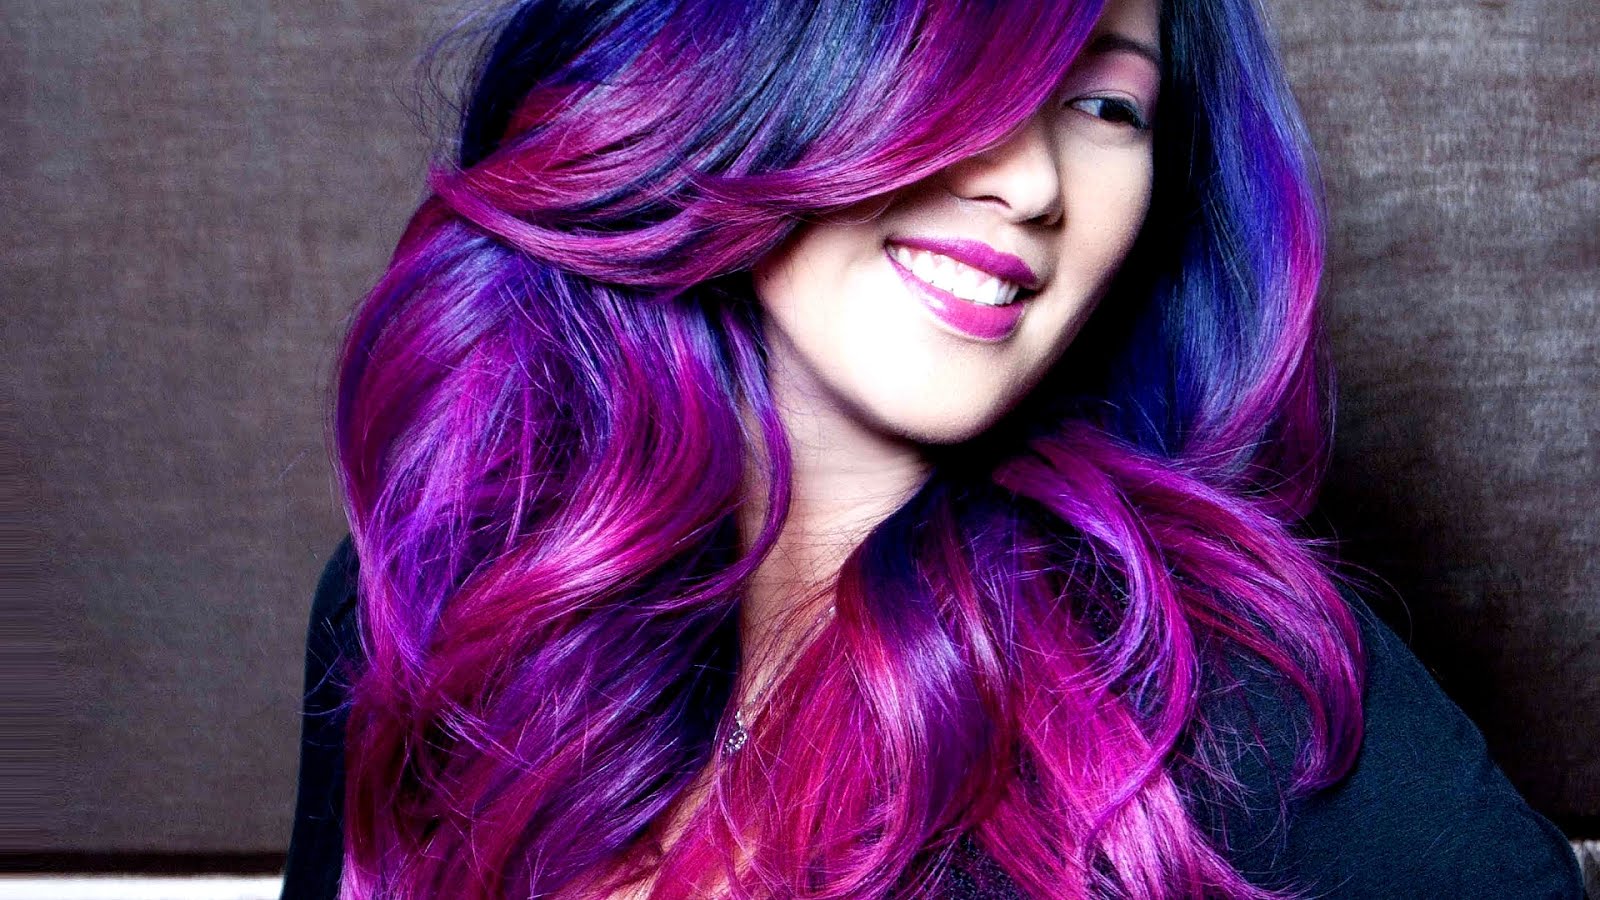 2. "How to Achieve Faded Blue and Pink Hair at Home" - wide 3